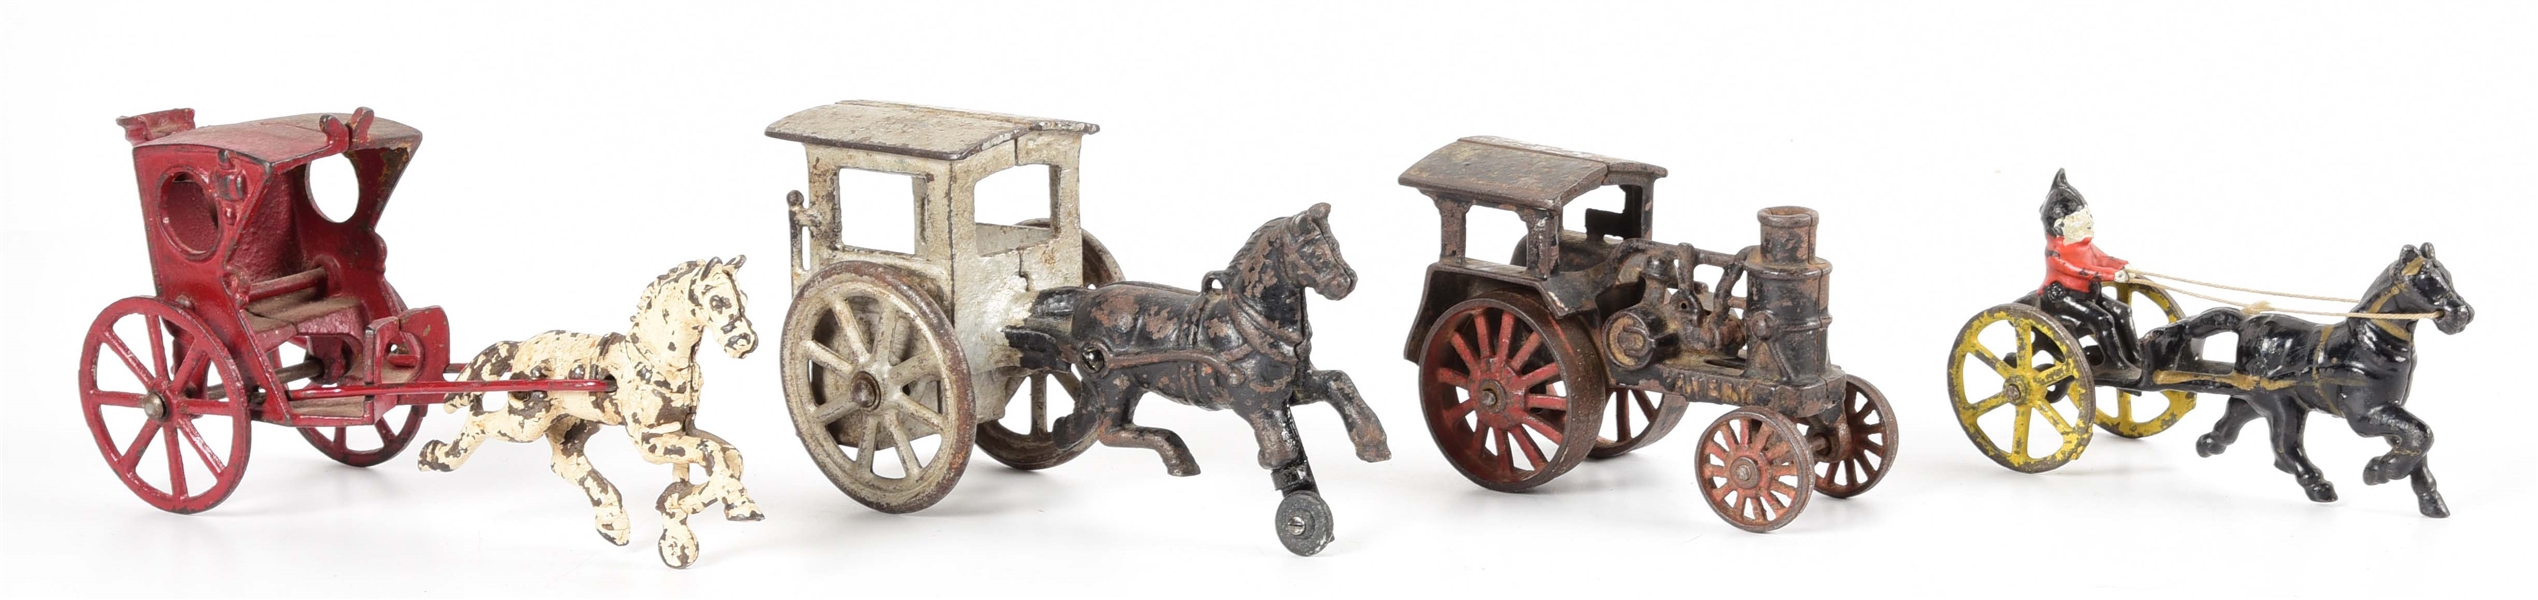 LOT OF 4: CAST IRON HORSE DRAWN TOYS.